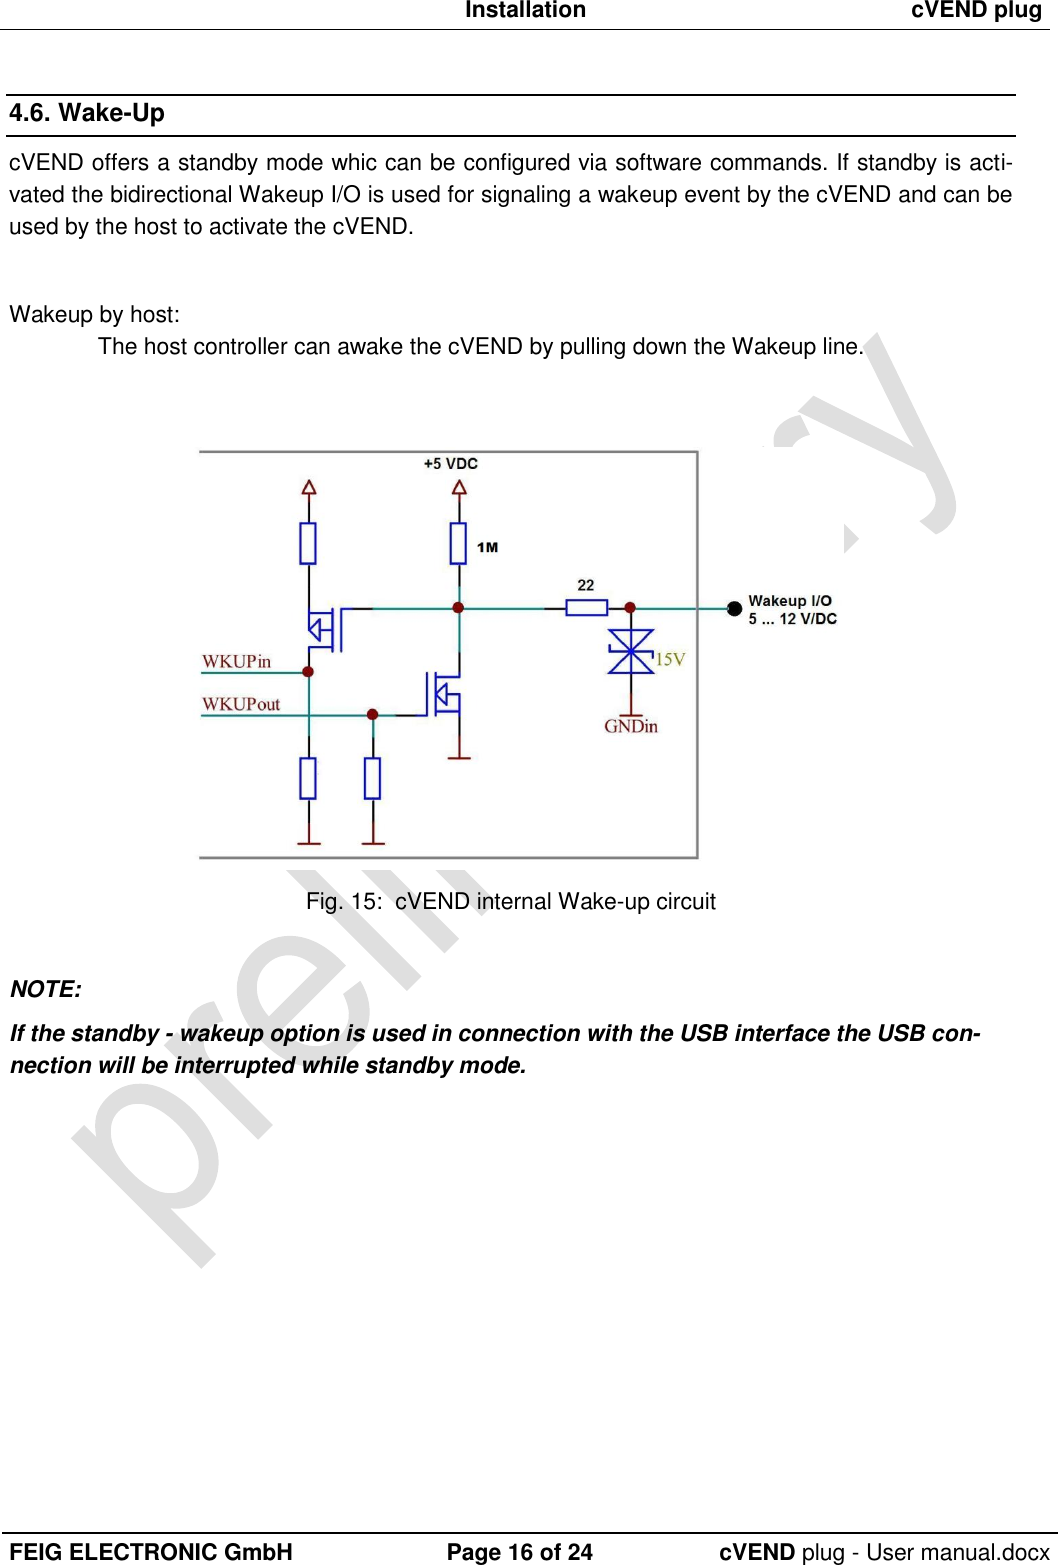  Installation cVEND plug  FEIG ELECTRONIC GmbH Page 16 of 24 cVEND plug - User manual.docx  4.6. Wake-Up cVEND offers a standby mode whic can be configured via software commands. If standby is acti-vated the bidirectional Wakeup I/O is used for signaling a wakeup event by the cVEND and can be used by the host to activate the cVEND.   Wakeup by host:  The host controller can awake the cVEND by pulling down the Wakeup line.    Fig. 15:  cVEND internal Wake-up circuit  NOTE:  If the standby - wakeup option is used in connection with the USB interface the USB con-nection will be interrupted while standby mode.   